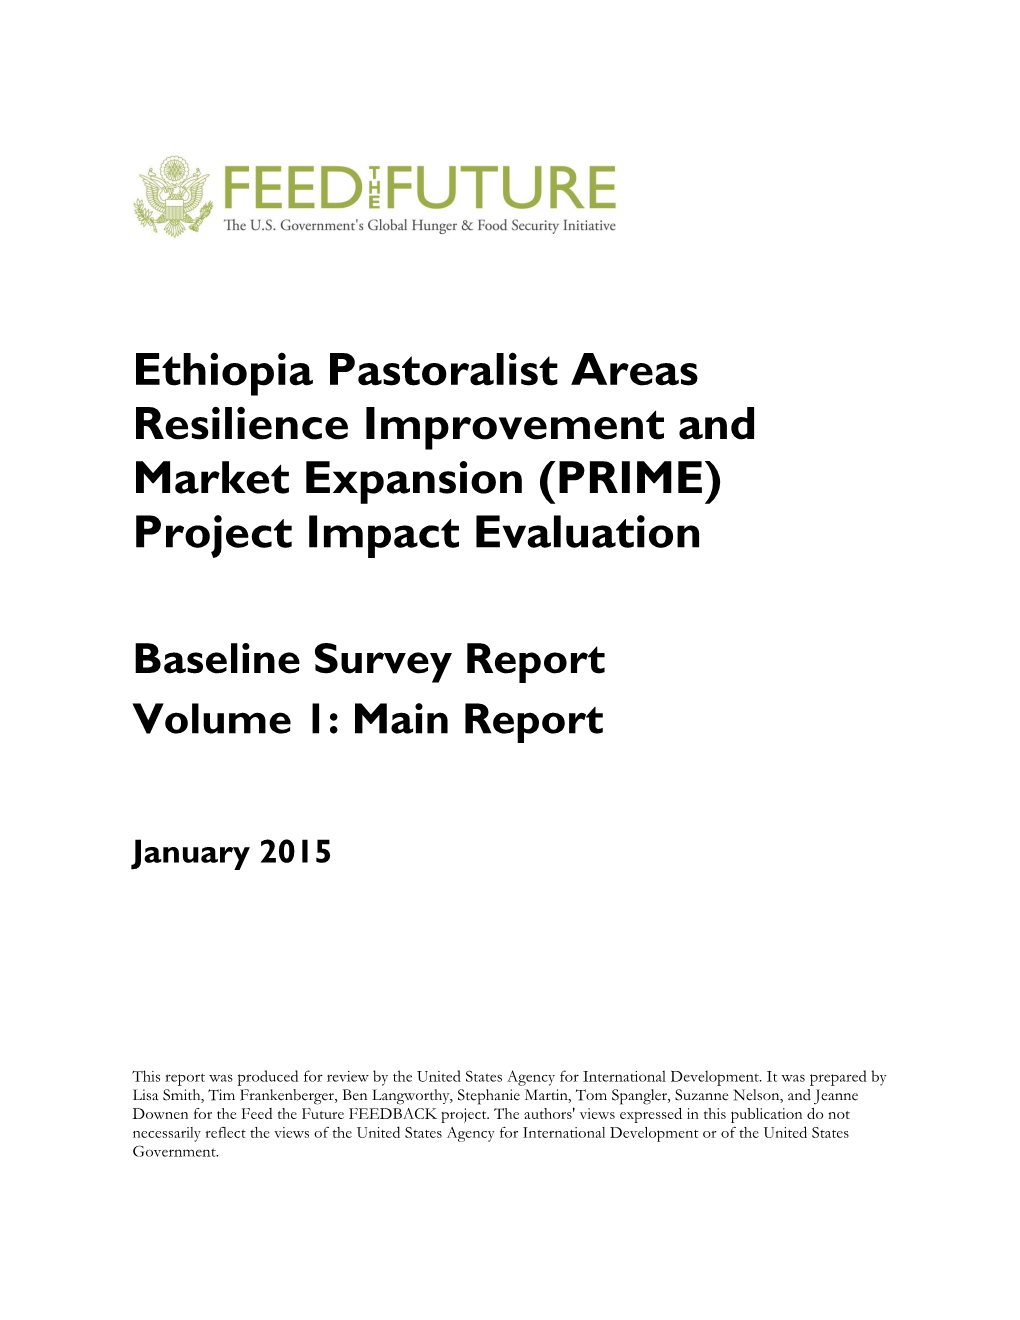 Ethiopia Pastoralist Areas Resilience Improvement and Market Expansion (PRIME) Project Impact Evaluation